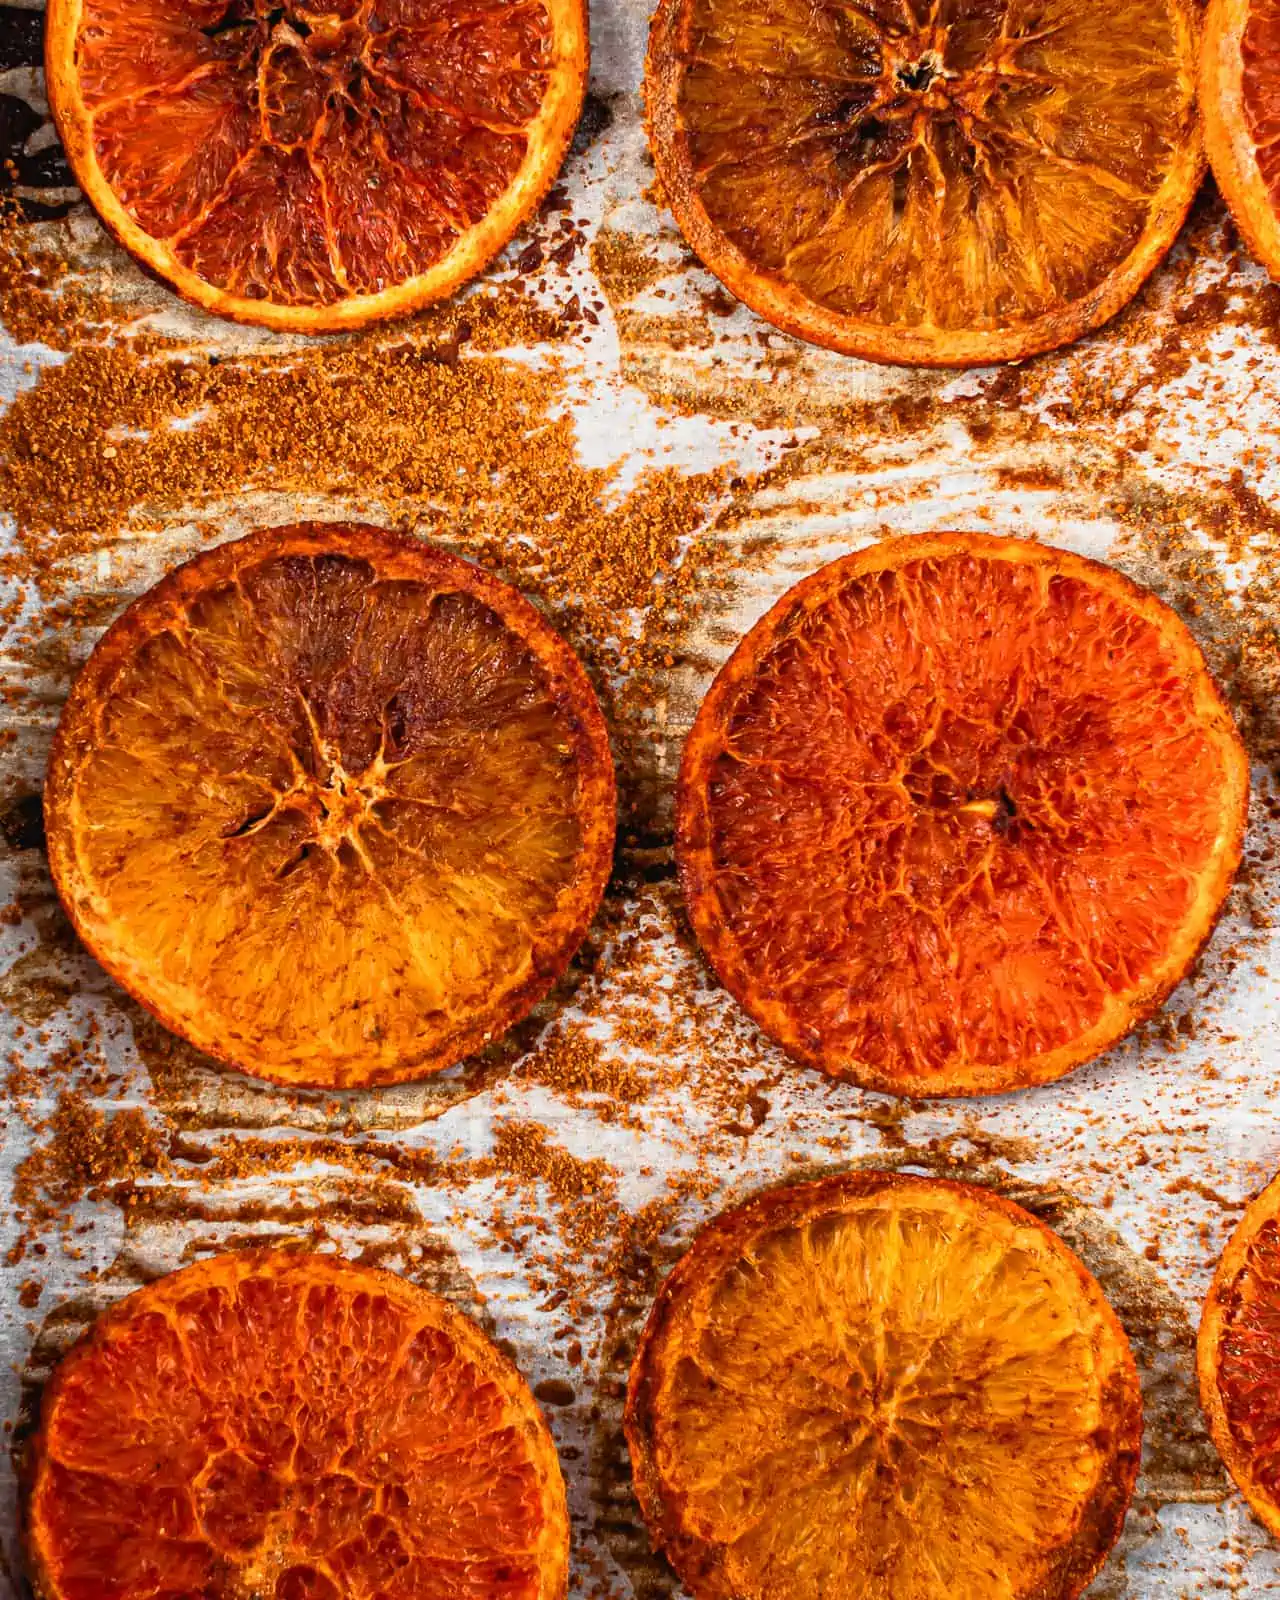 dehydrated orange slices post-baking on a baking sheet.